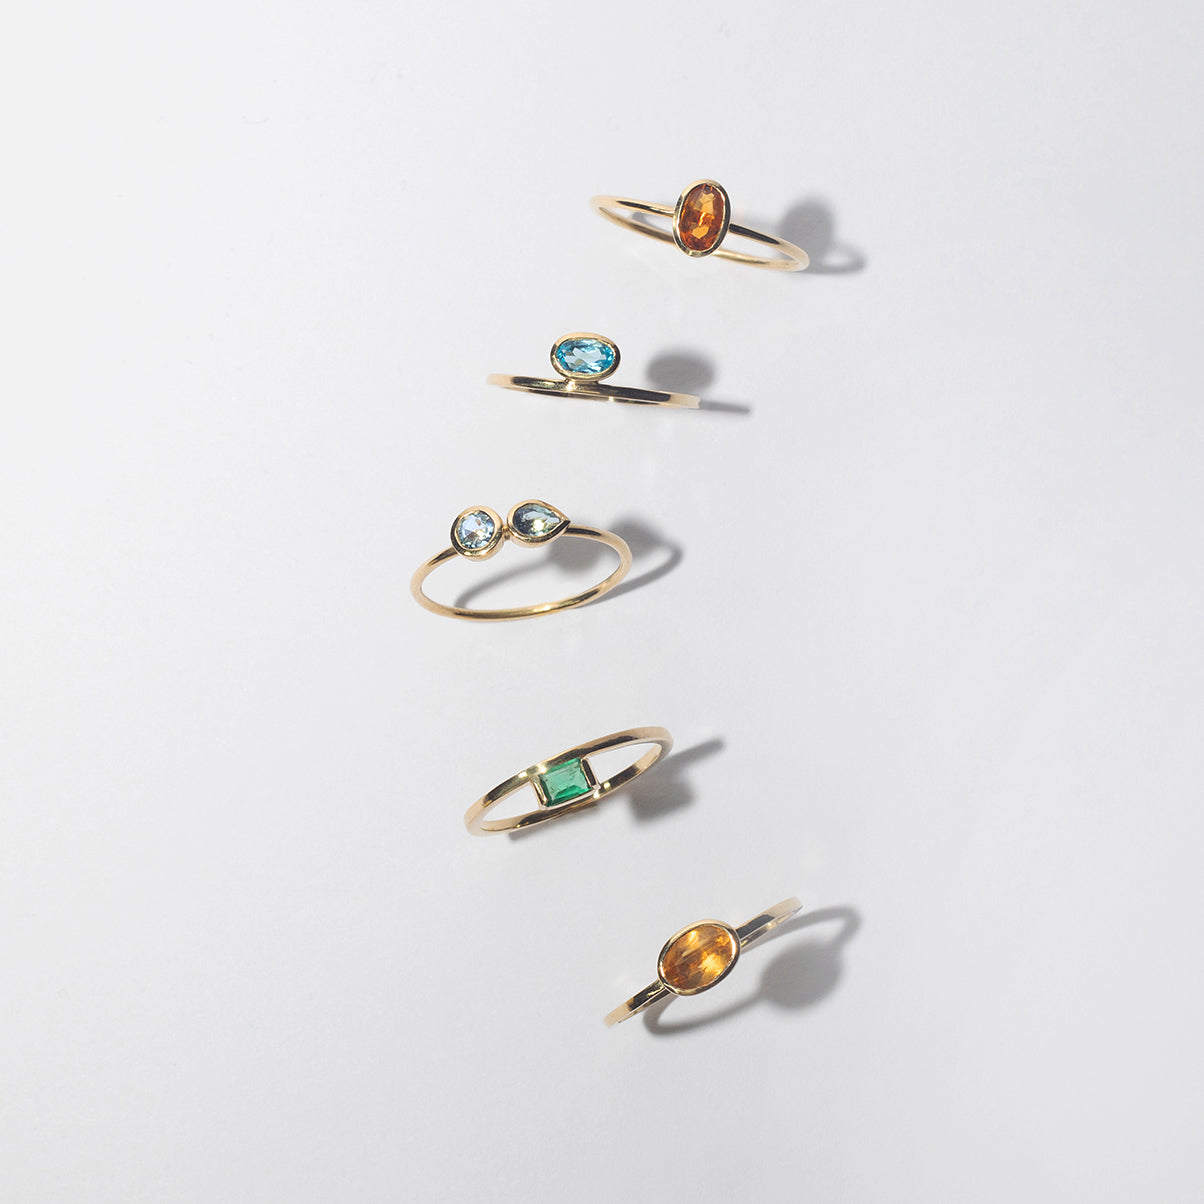 Stacking Rings - Brazilian Gemstones in recycled solid 18ct Gold by Adriana Chede Jewellery London